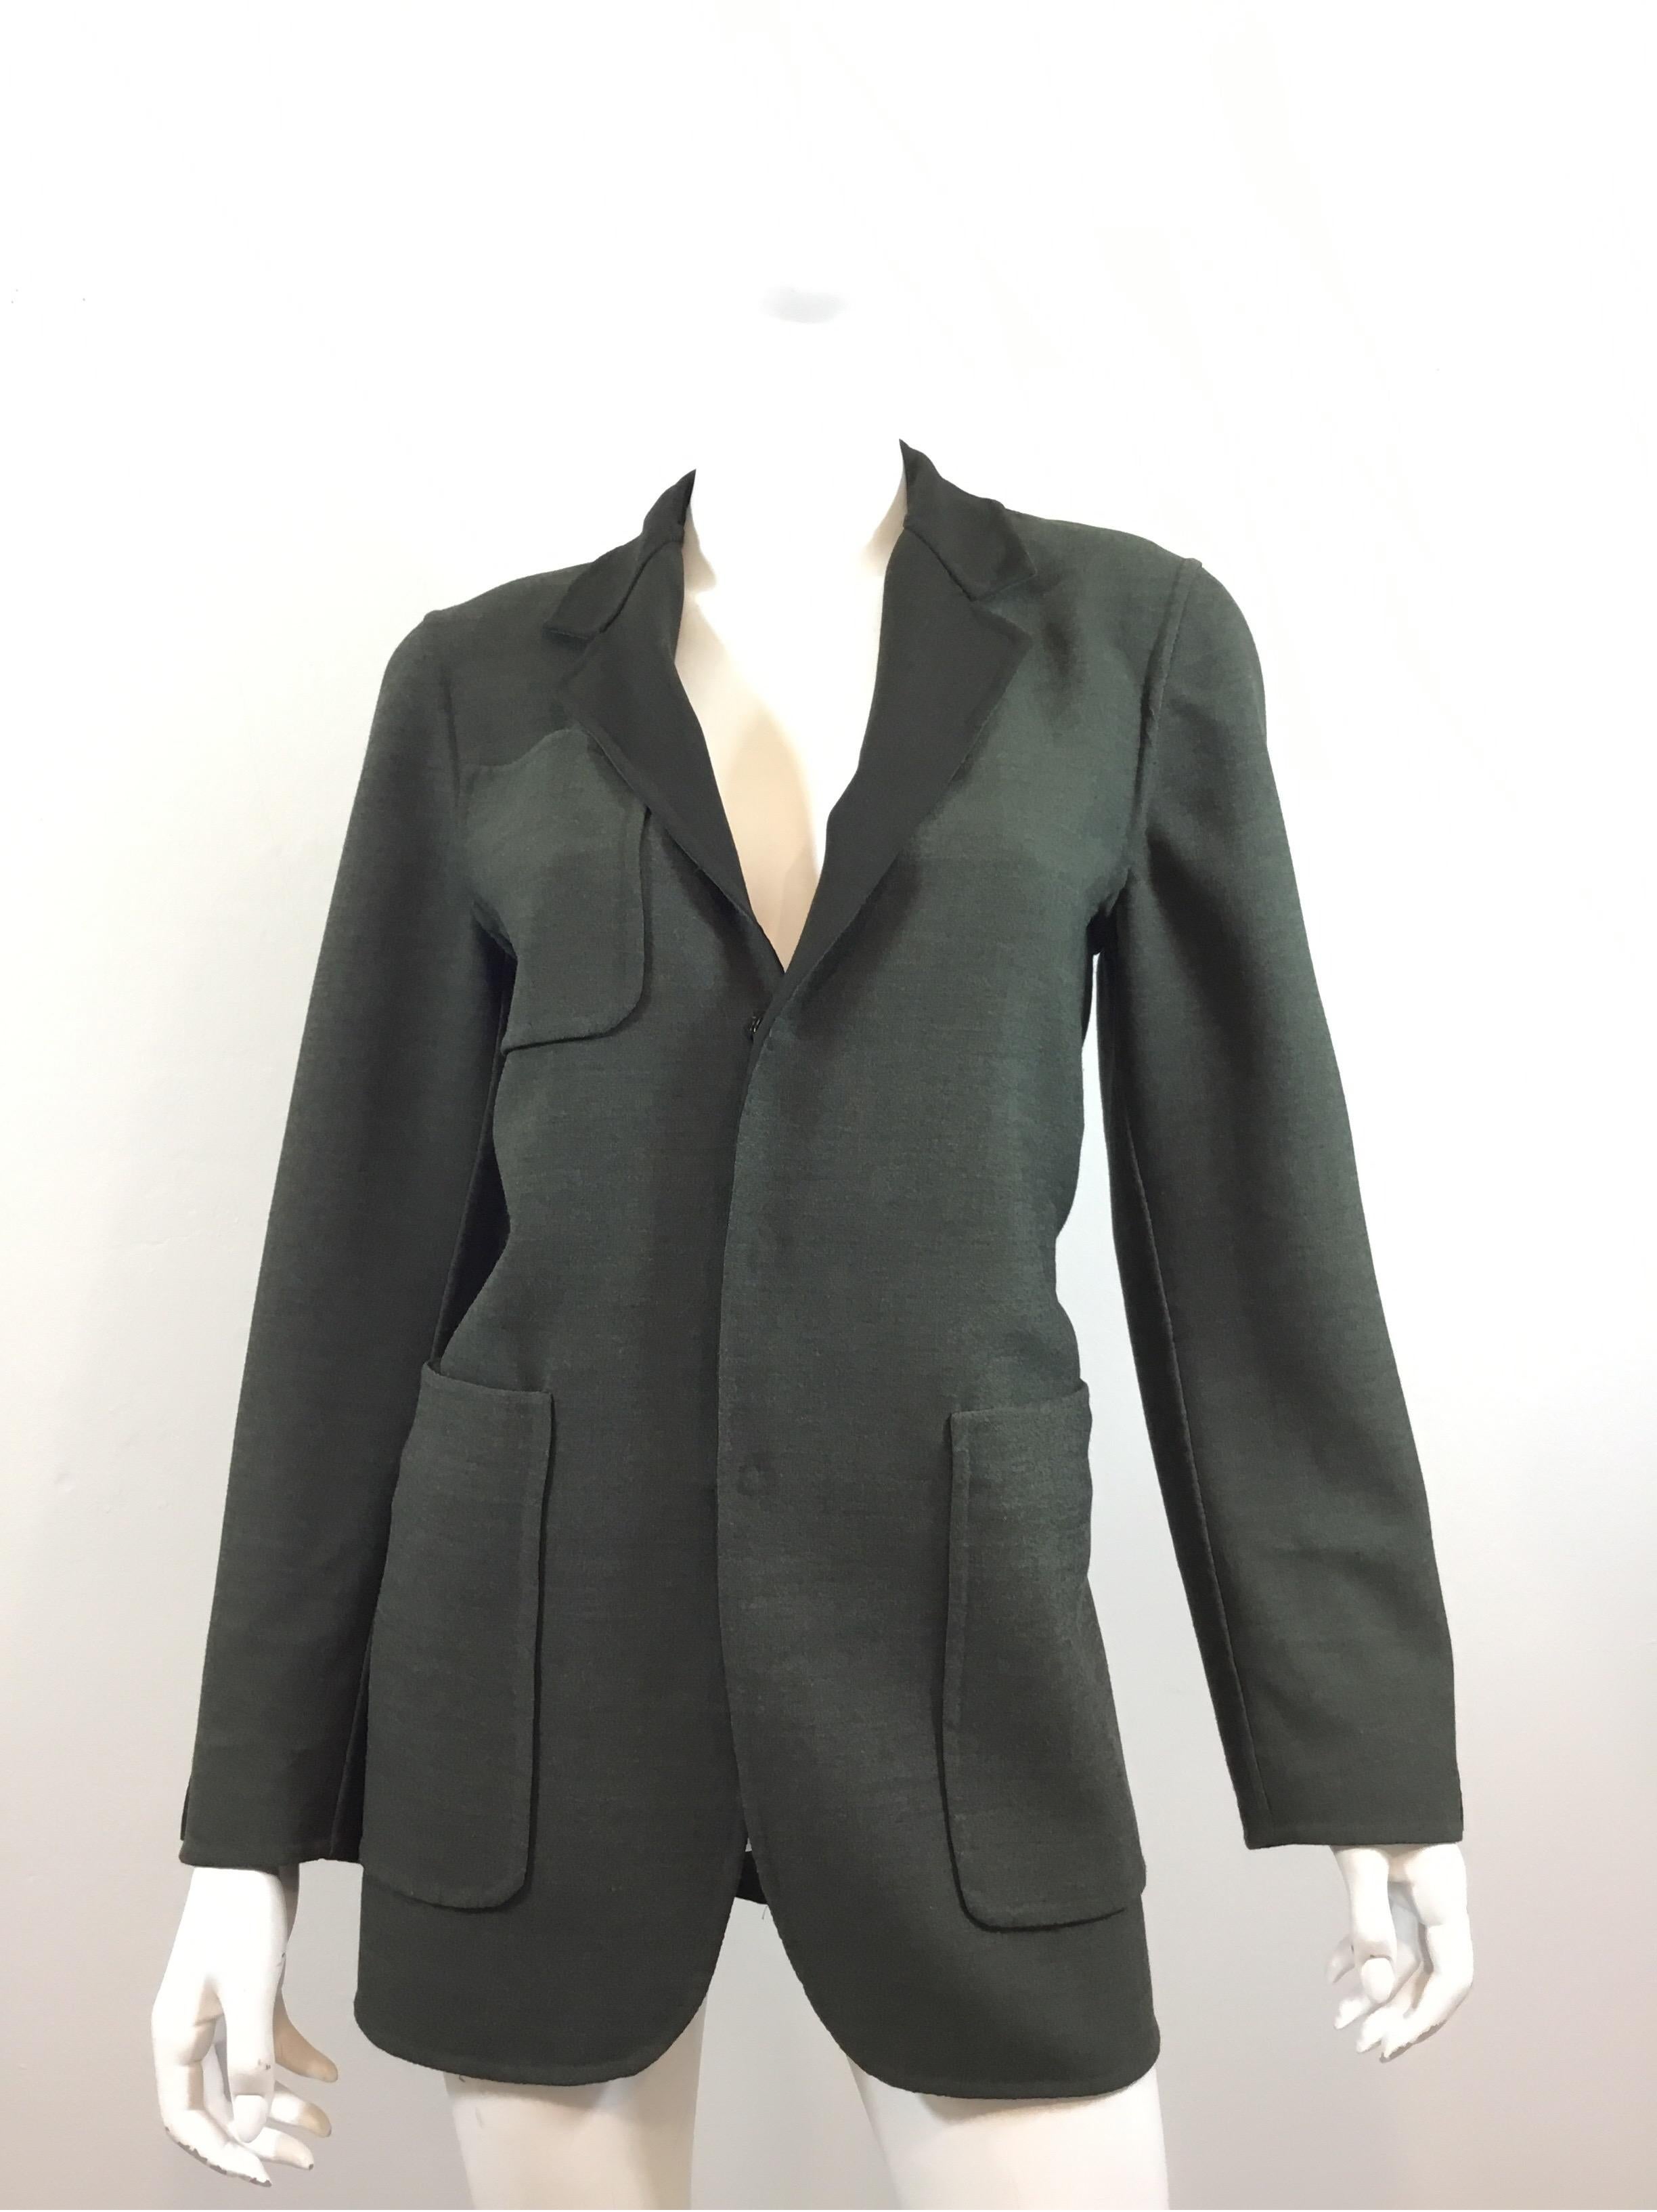 Jean Paul Gaultier Jacket is featured in an Olive green color and is reversible with concealed snap button closures along the front and on the cuffs. Jacket has one pocket on the right bust and two pockets at the hips, labeled size US 6/ IT 40,